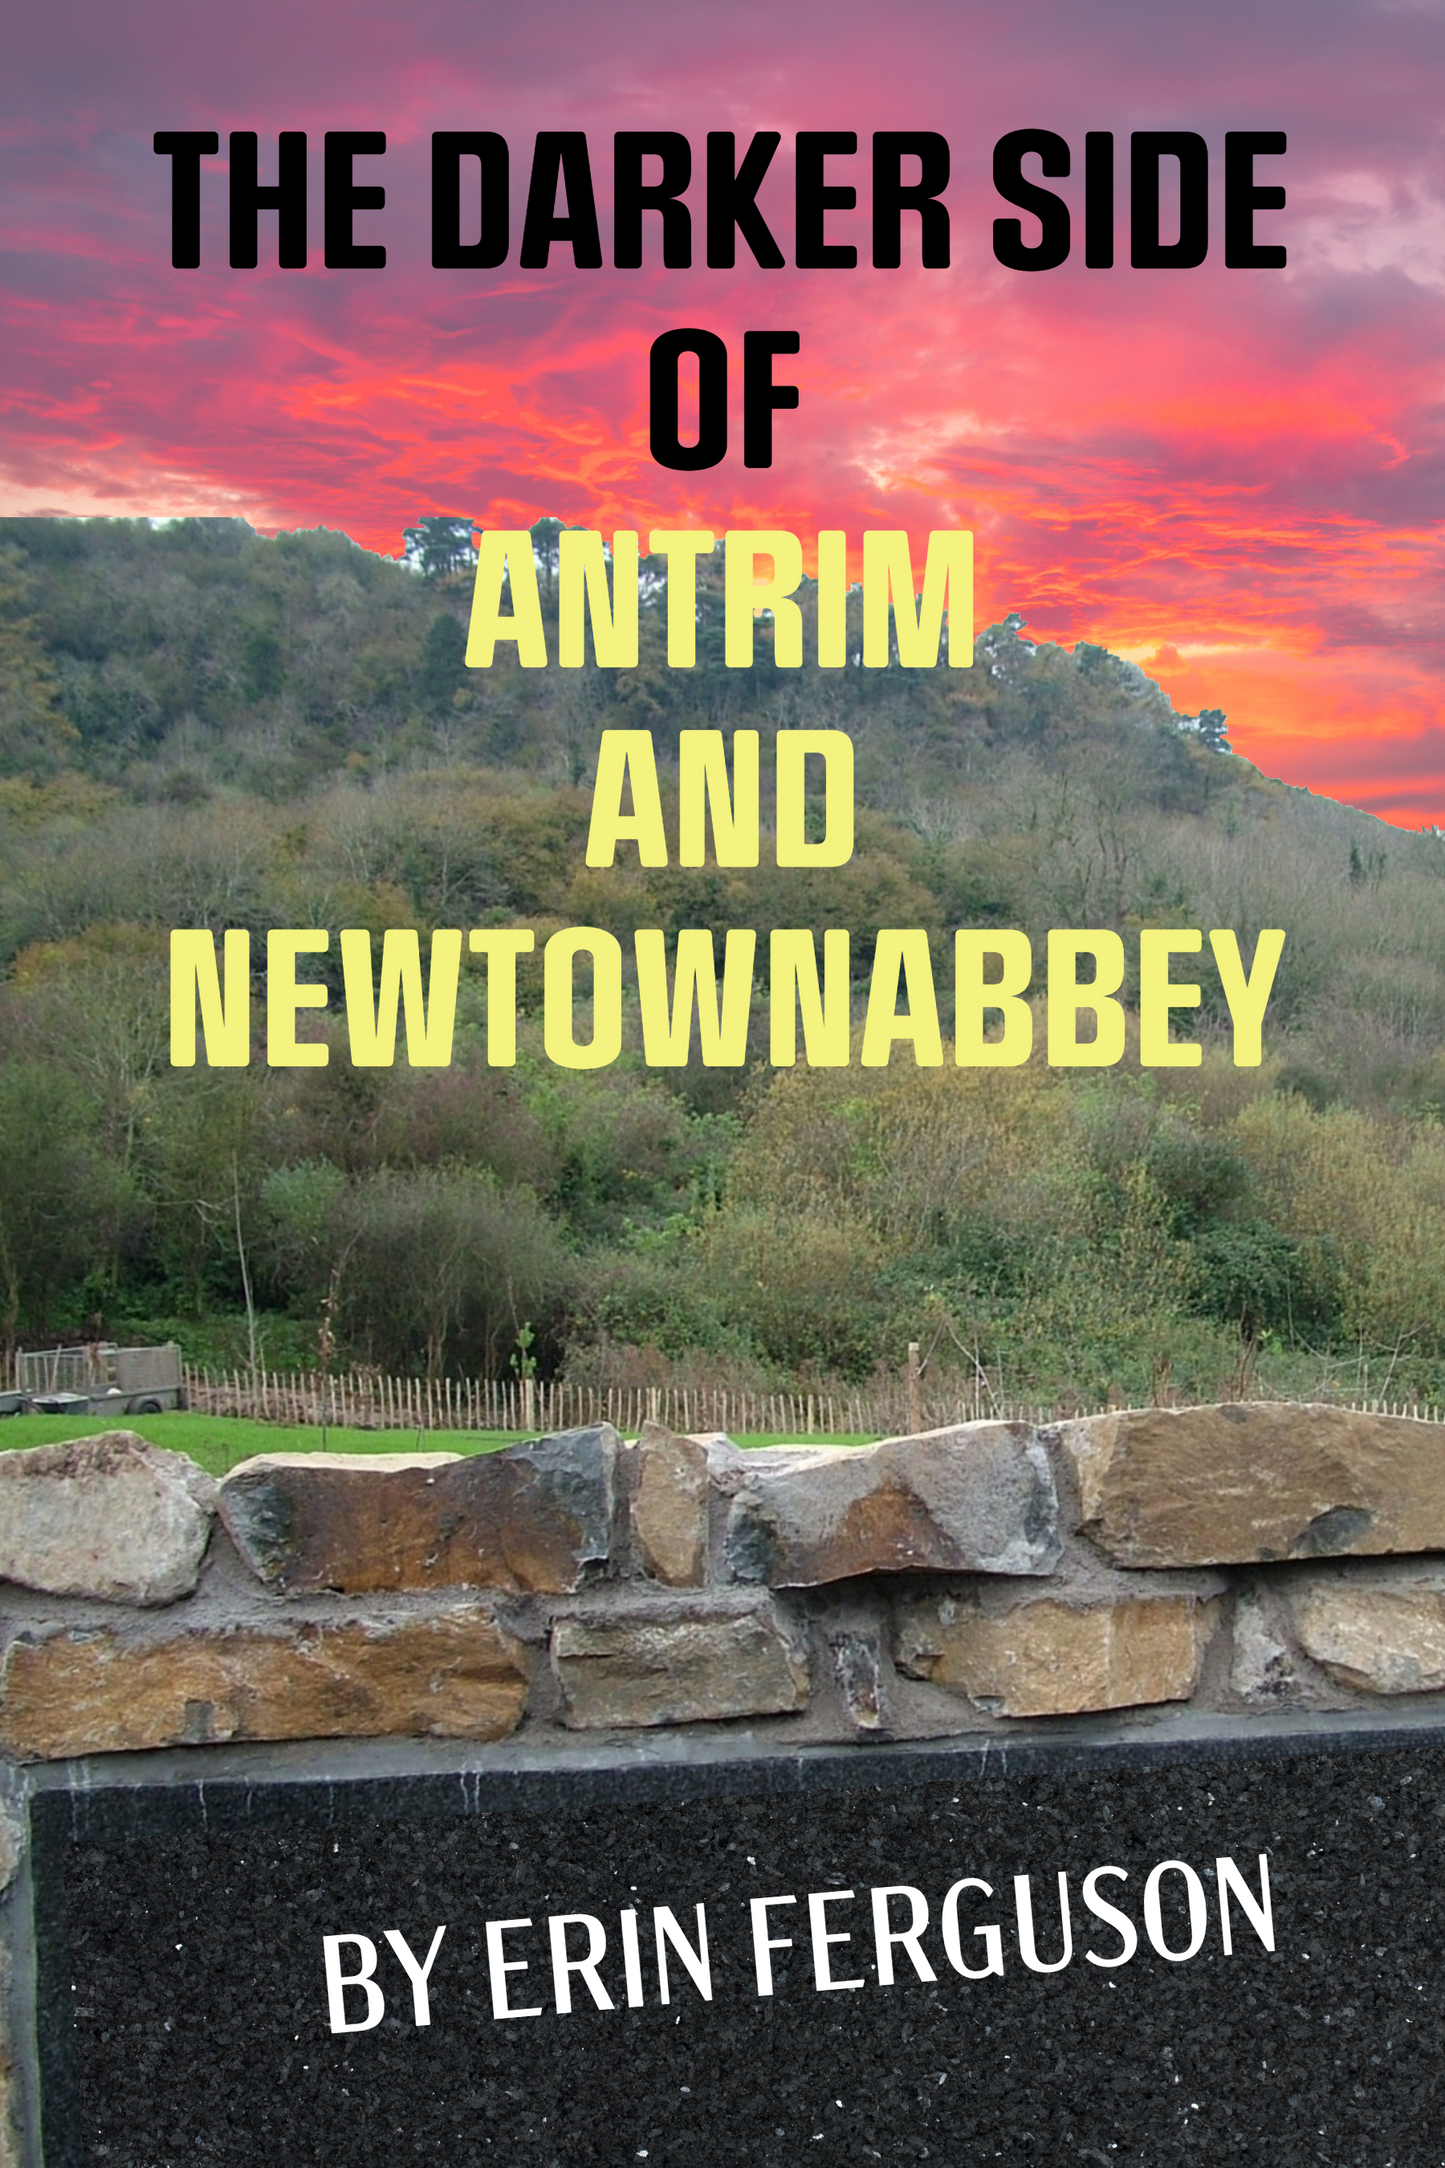 The Darker Side of Antrim and Newtownabbey